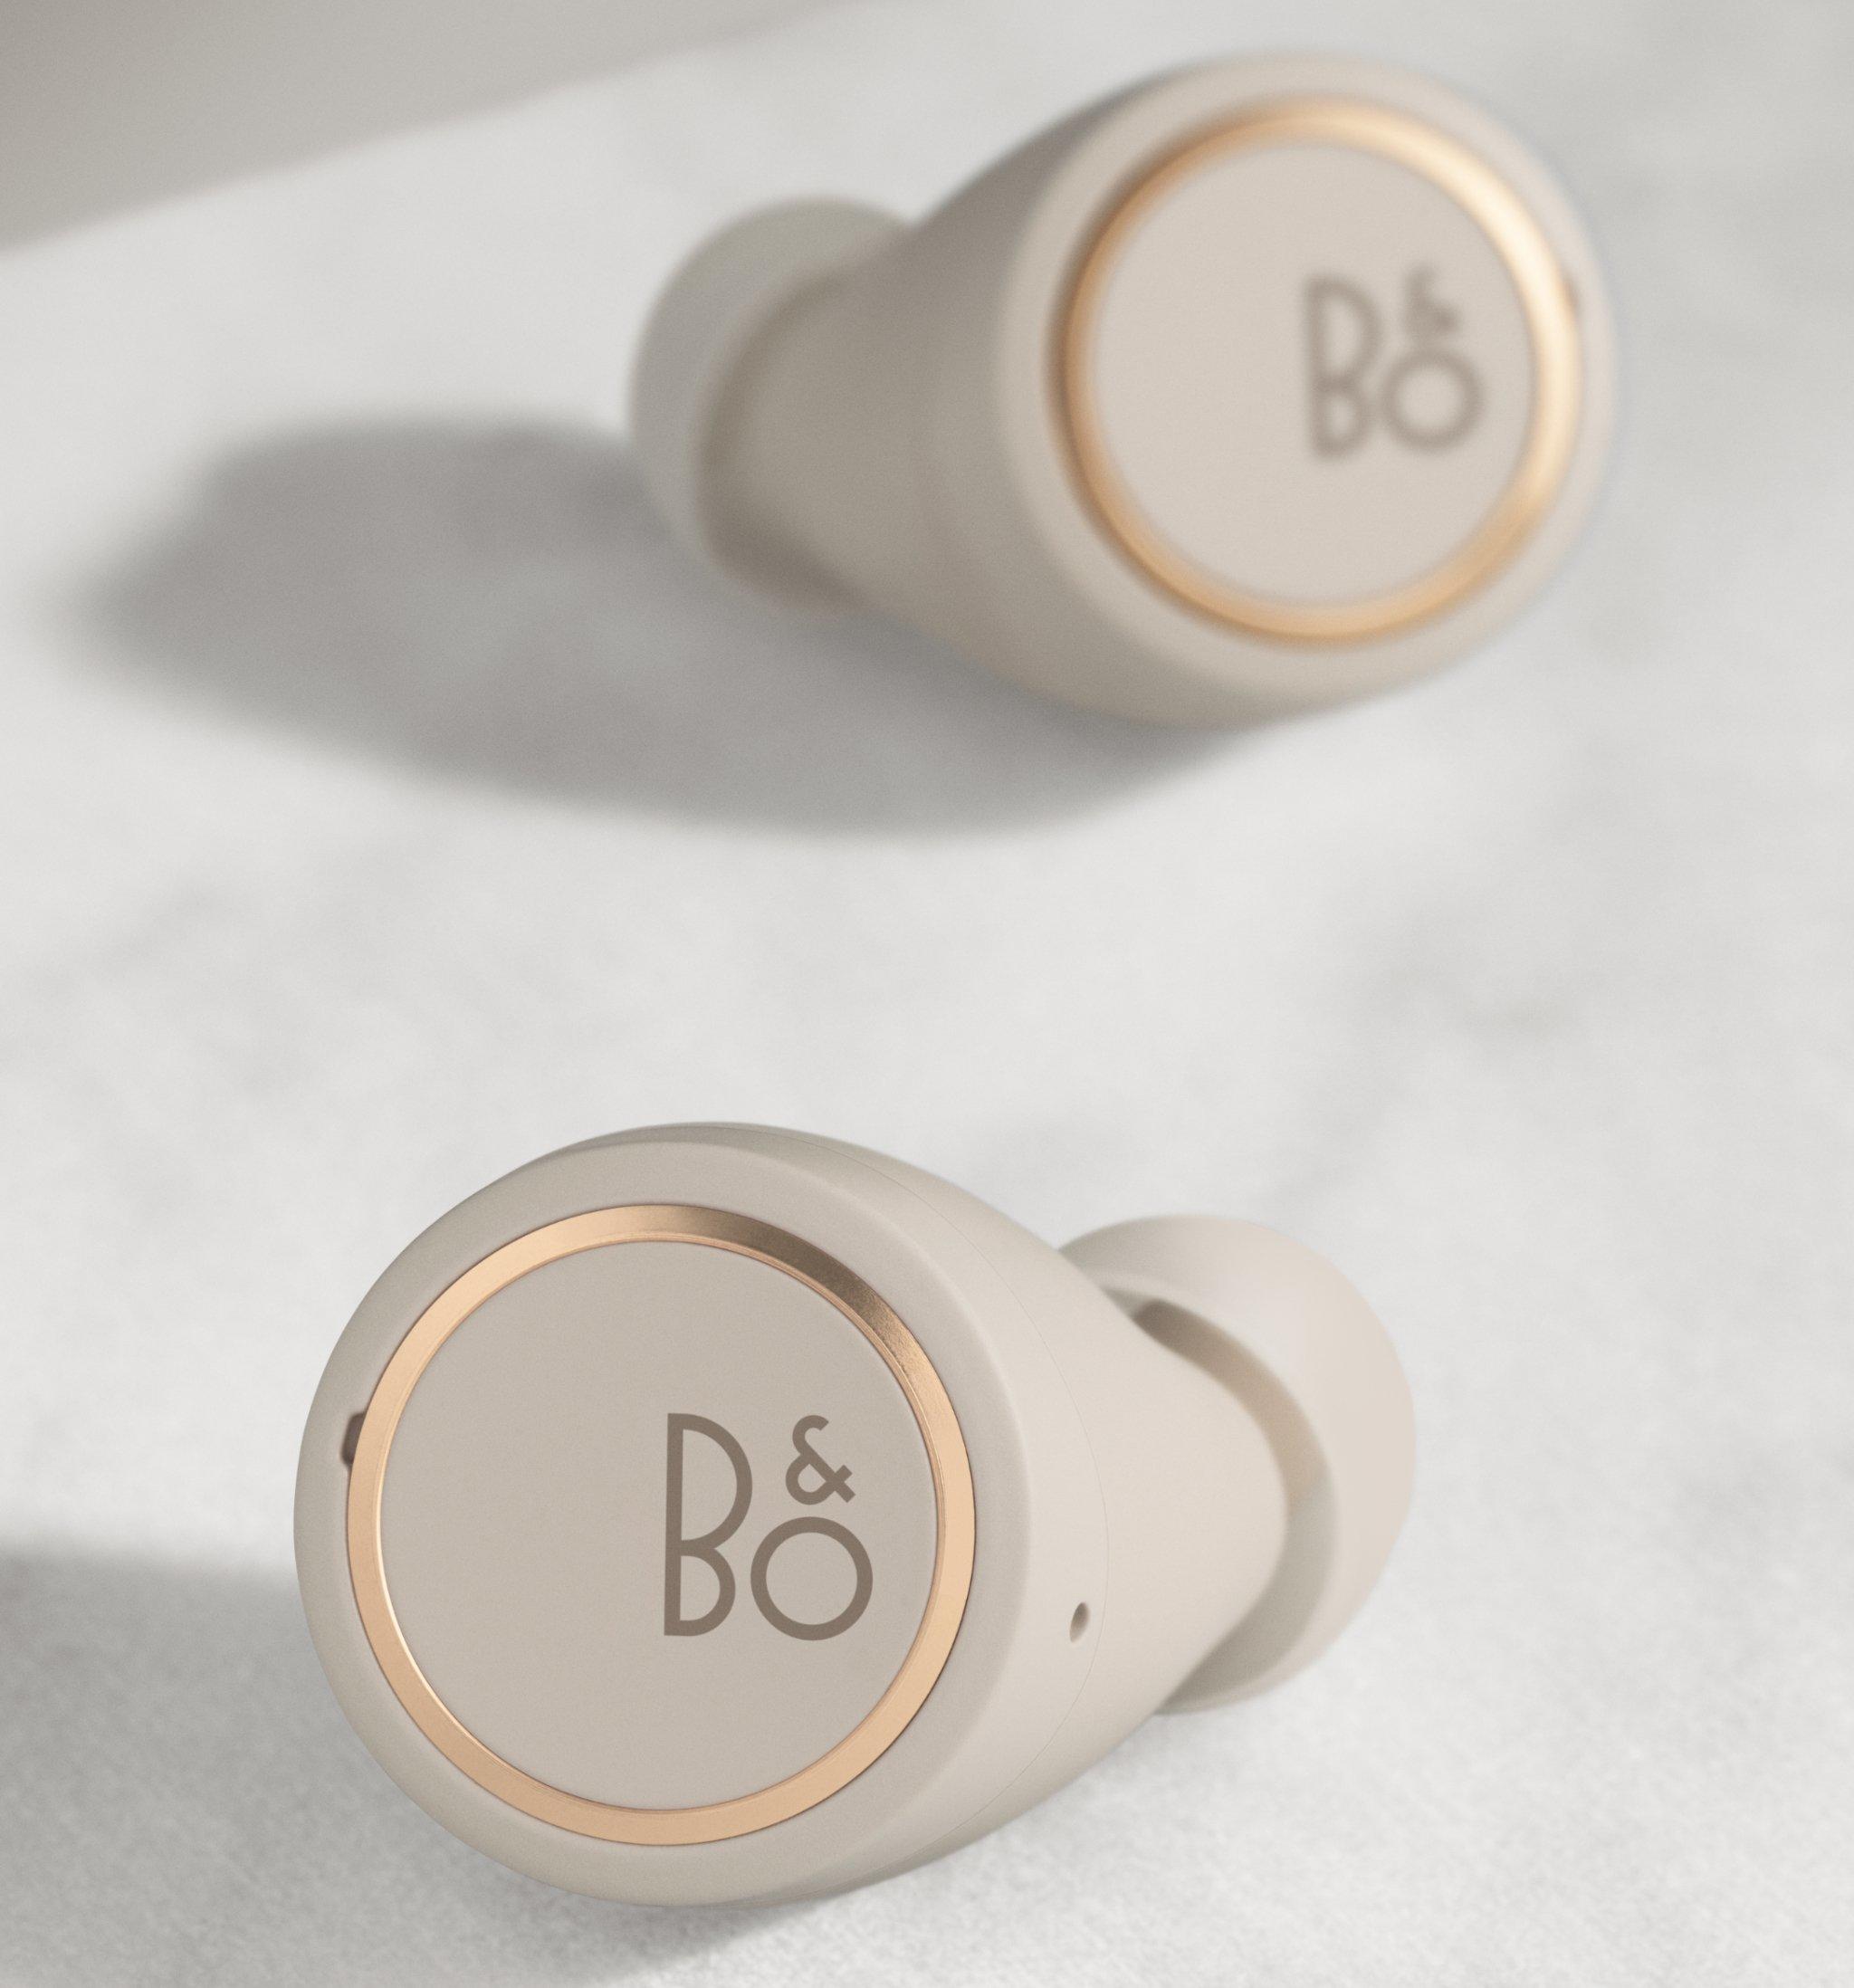 Bang&Olufsen GOLDTONE BEOPLAY E8 3RD